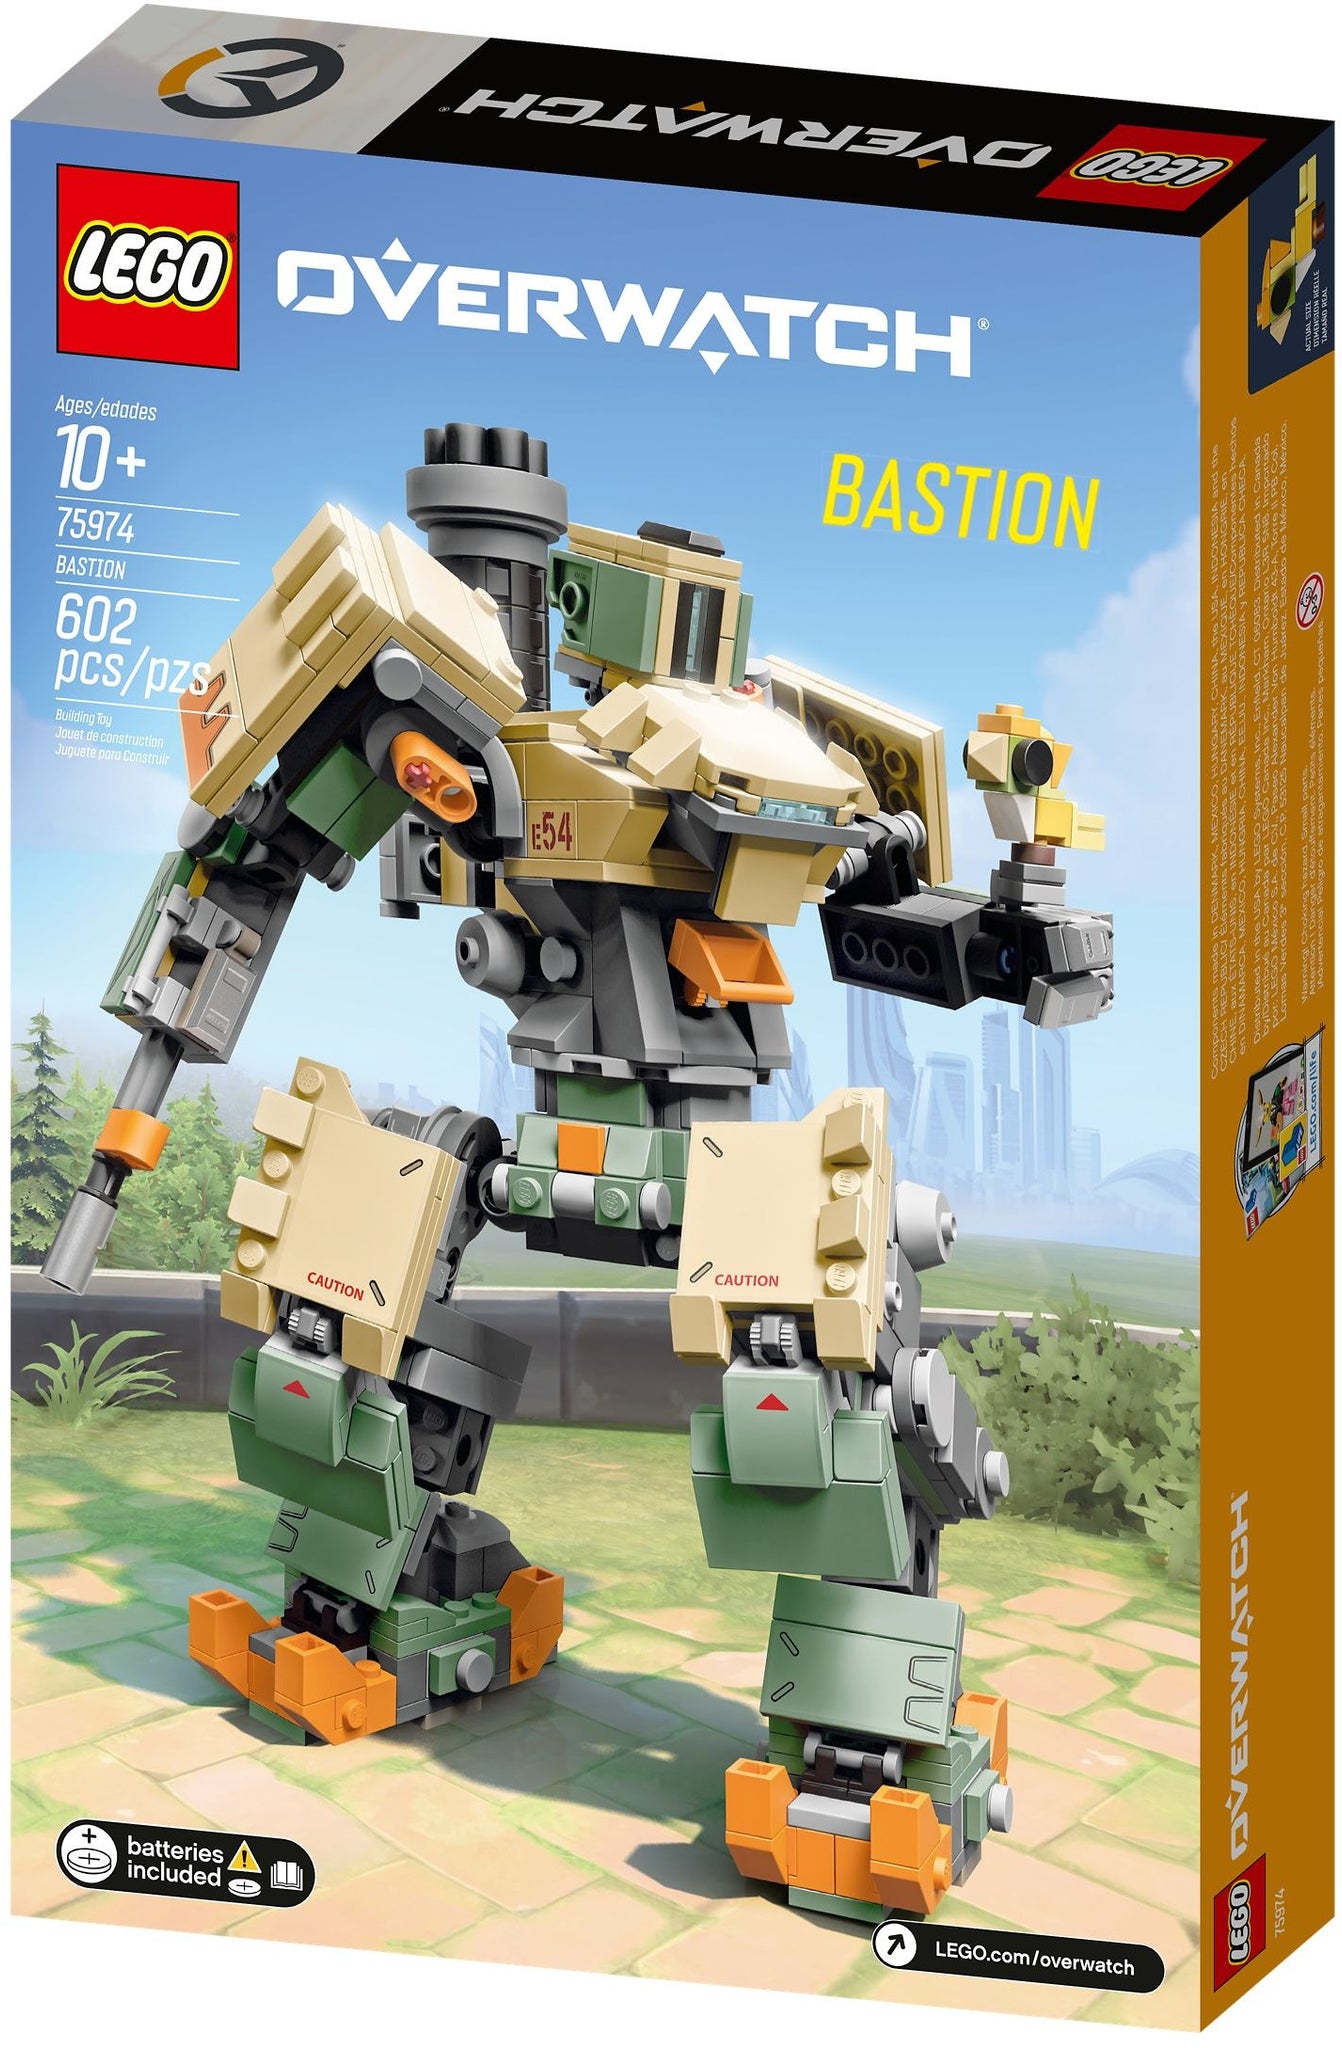 LEGO® Overwatch® 75974 Bastion (602 pieces) – AESOP'S FABLE